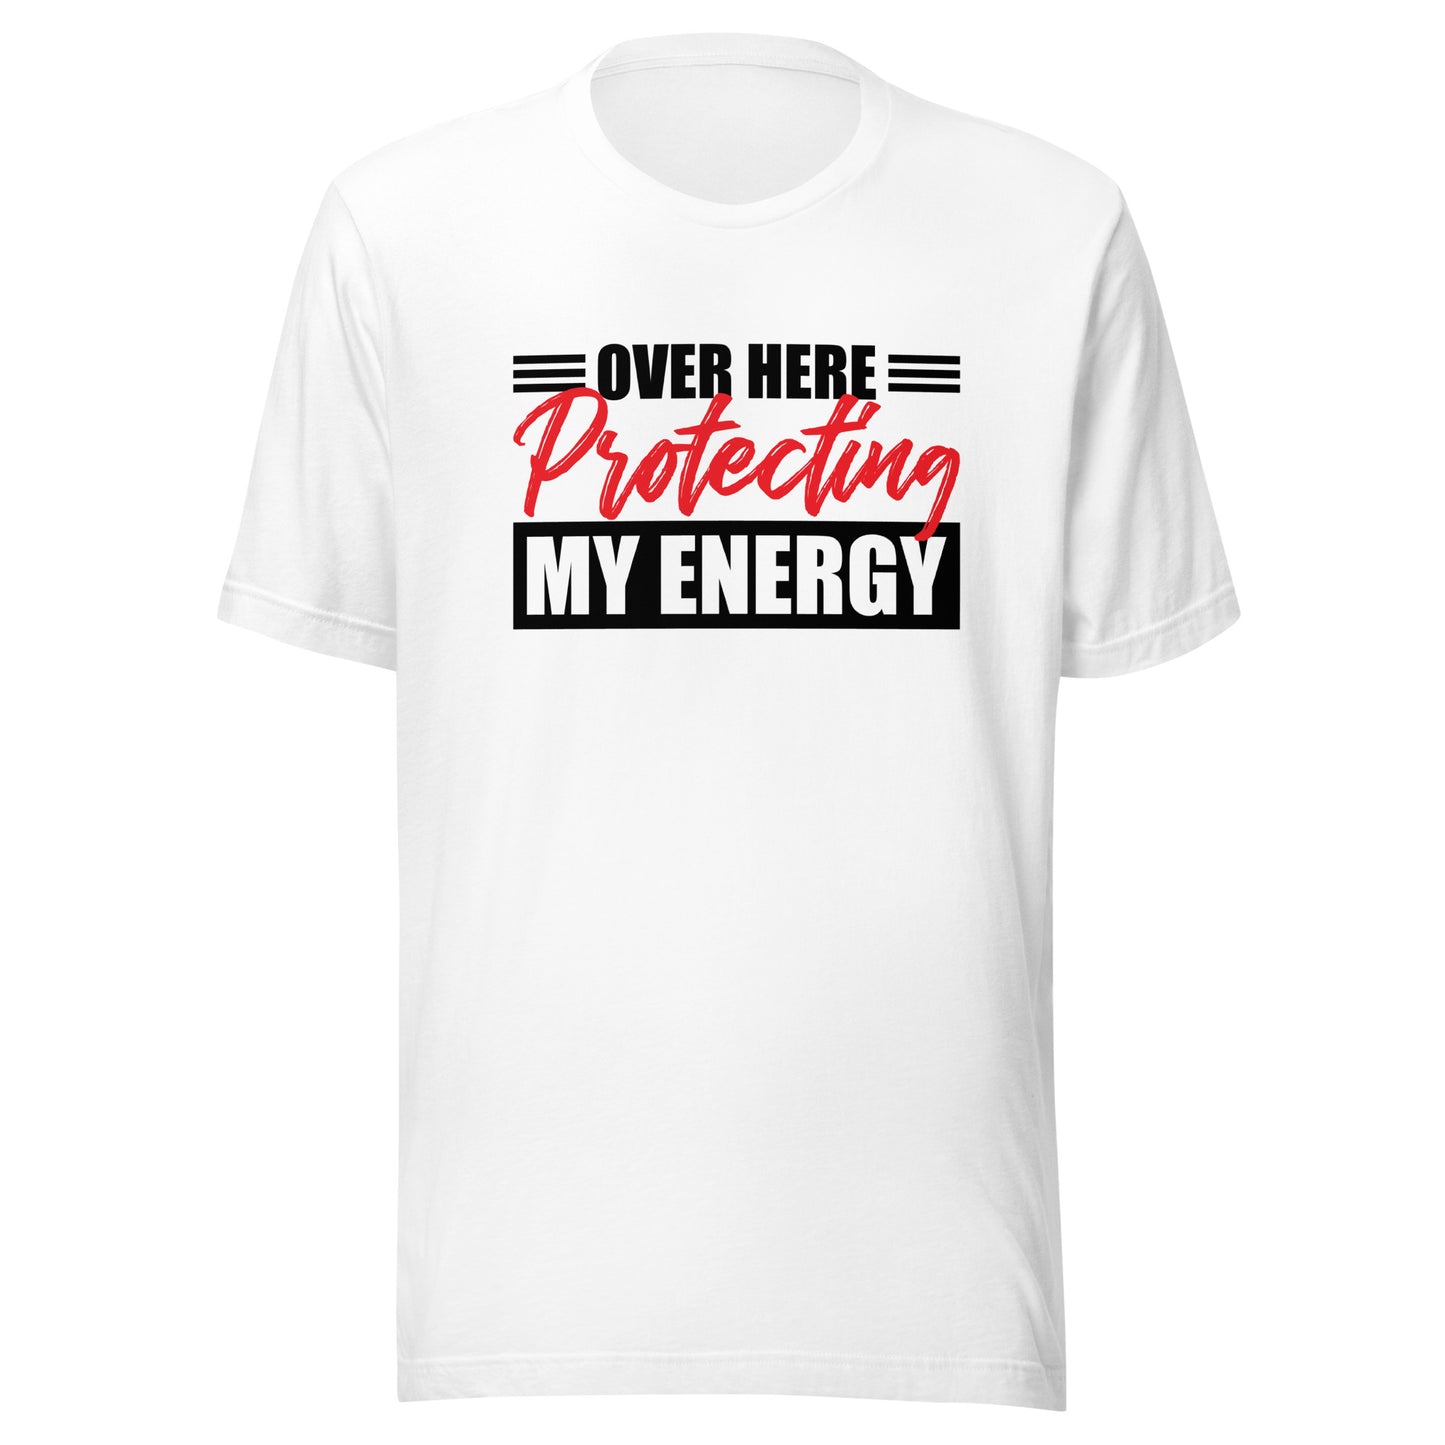 Over here protecting my energy t-shirt